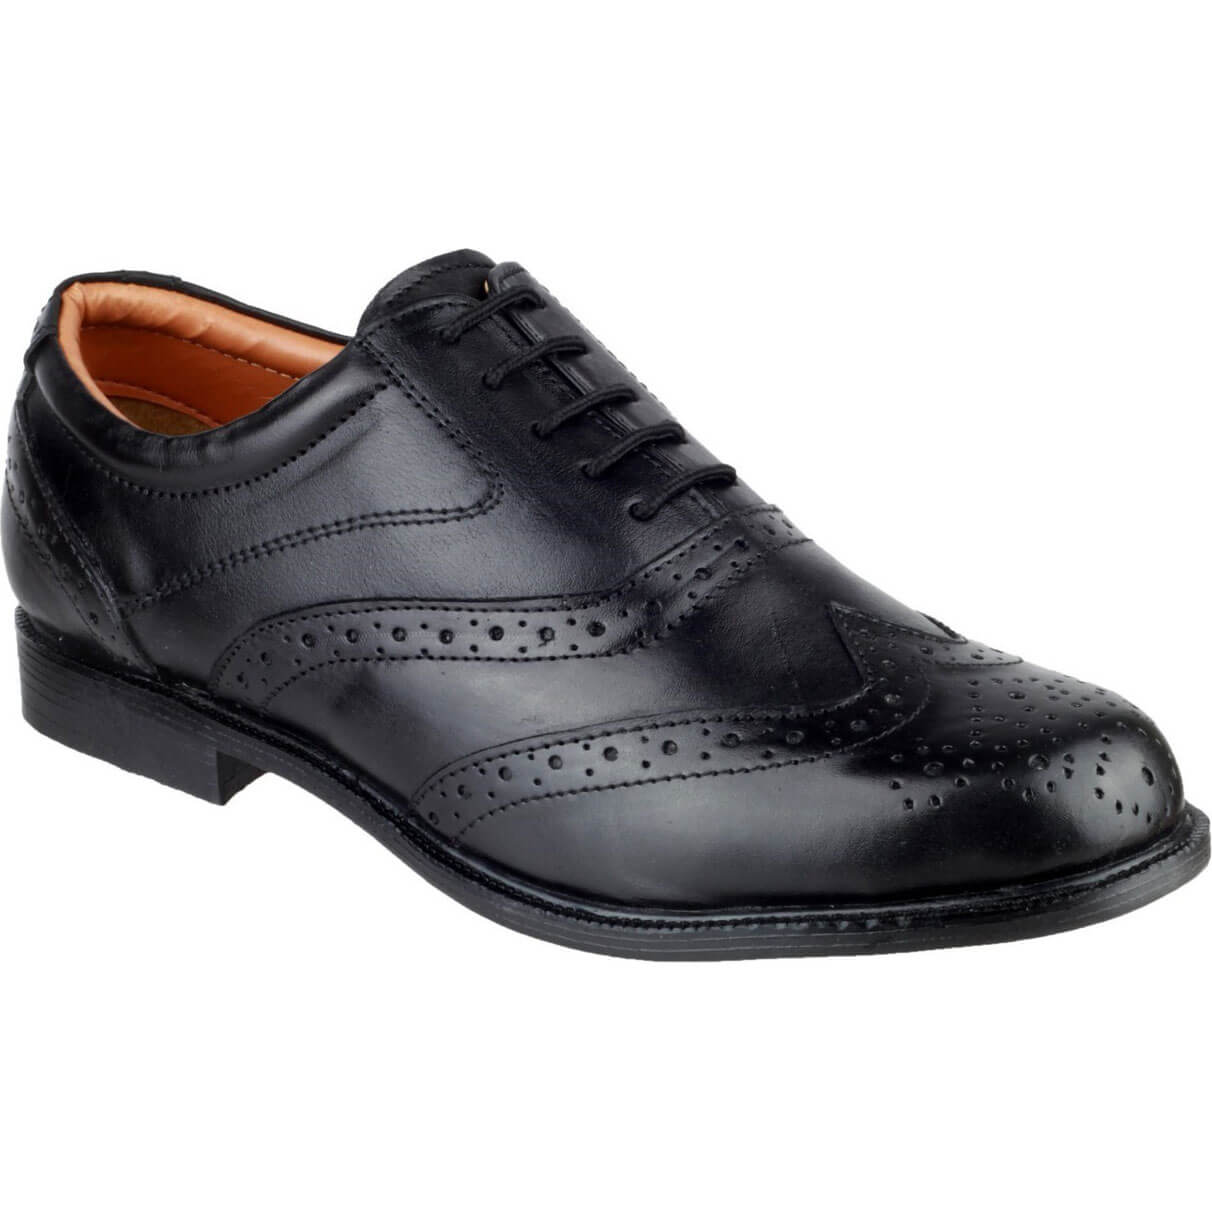 Image of Amblers Liverpool Oxford Brogue Black Size 7